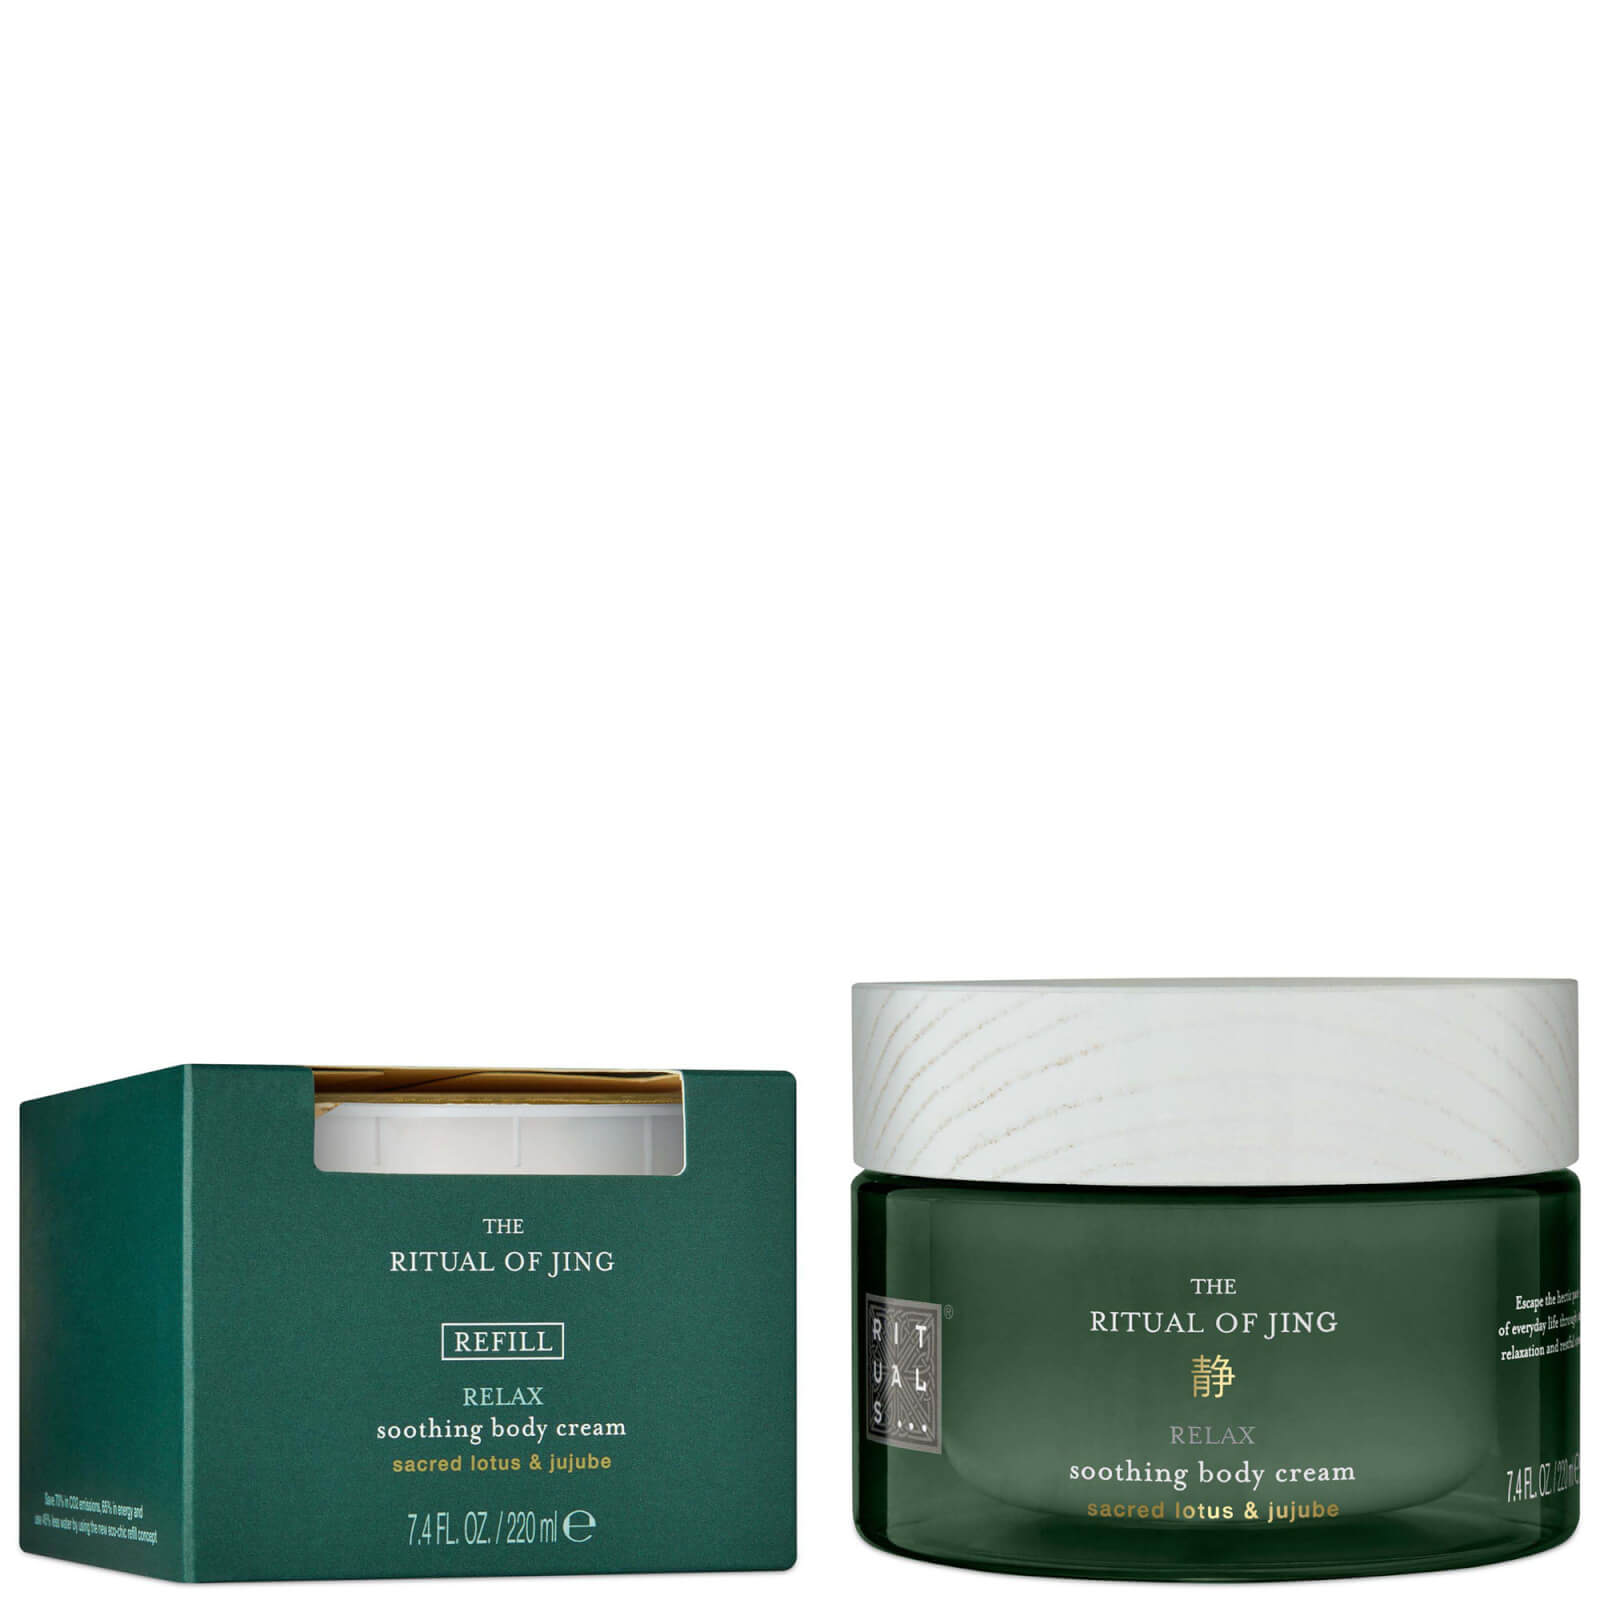 Rituals The Ritual of Jing Subtle Floral Lotus & Jujube Moisturising Body Cream and Refill Pack 2 x 